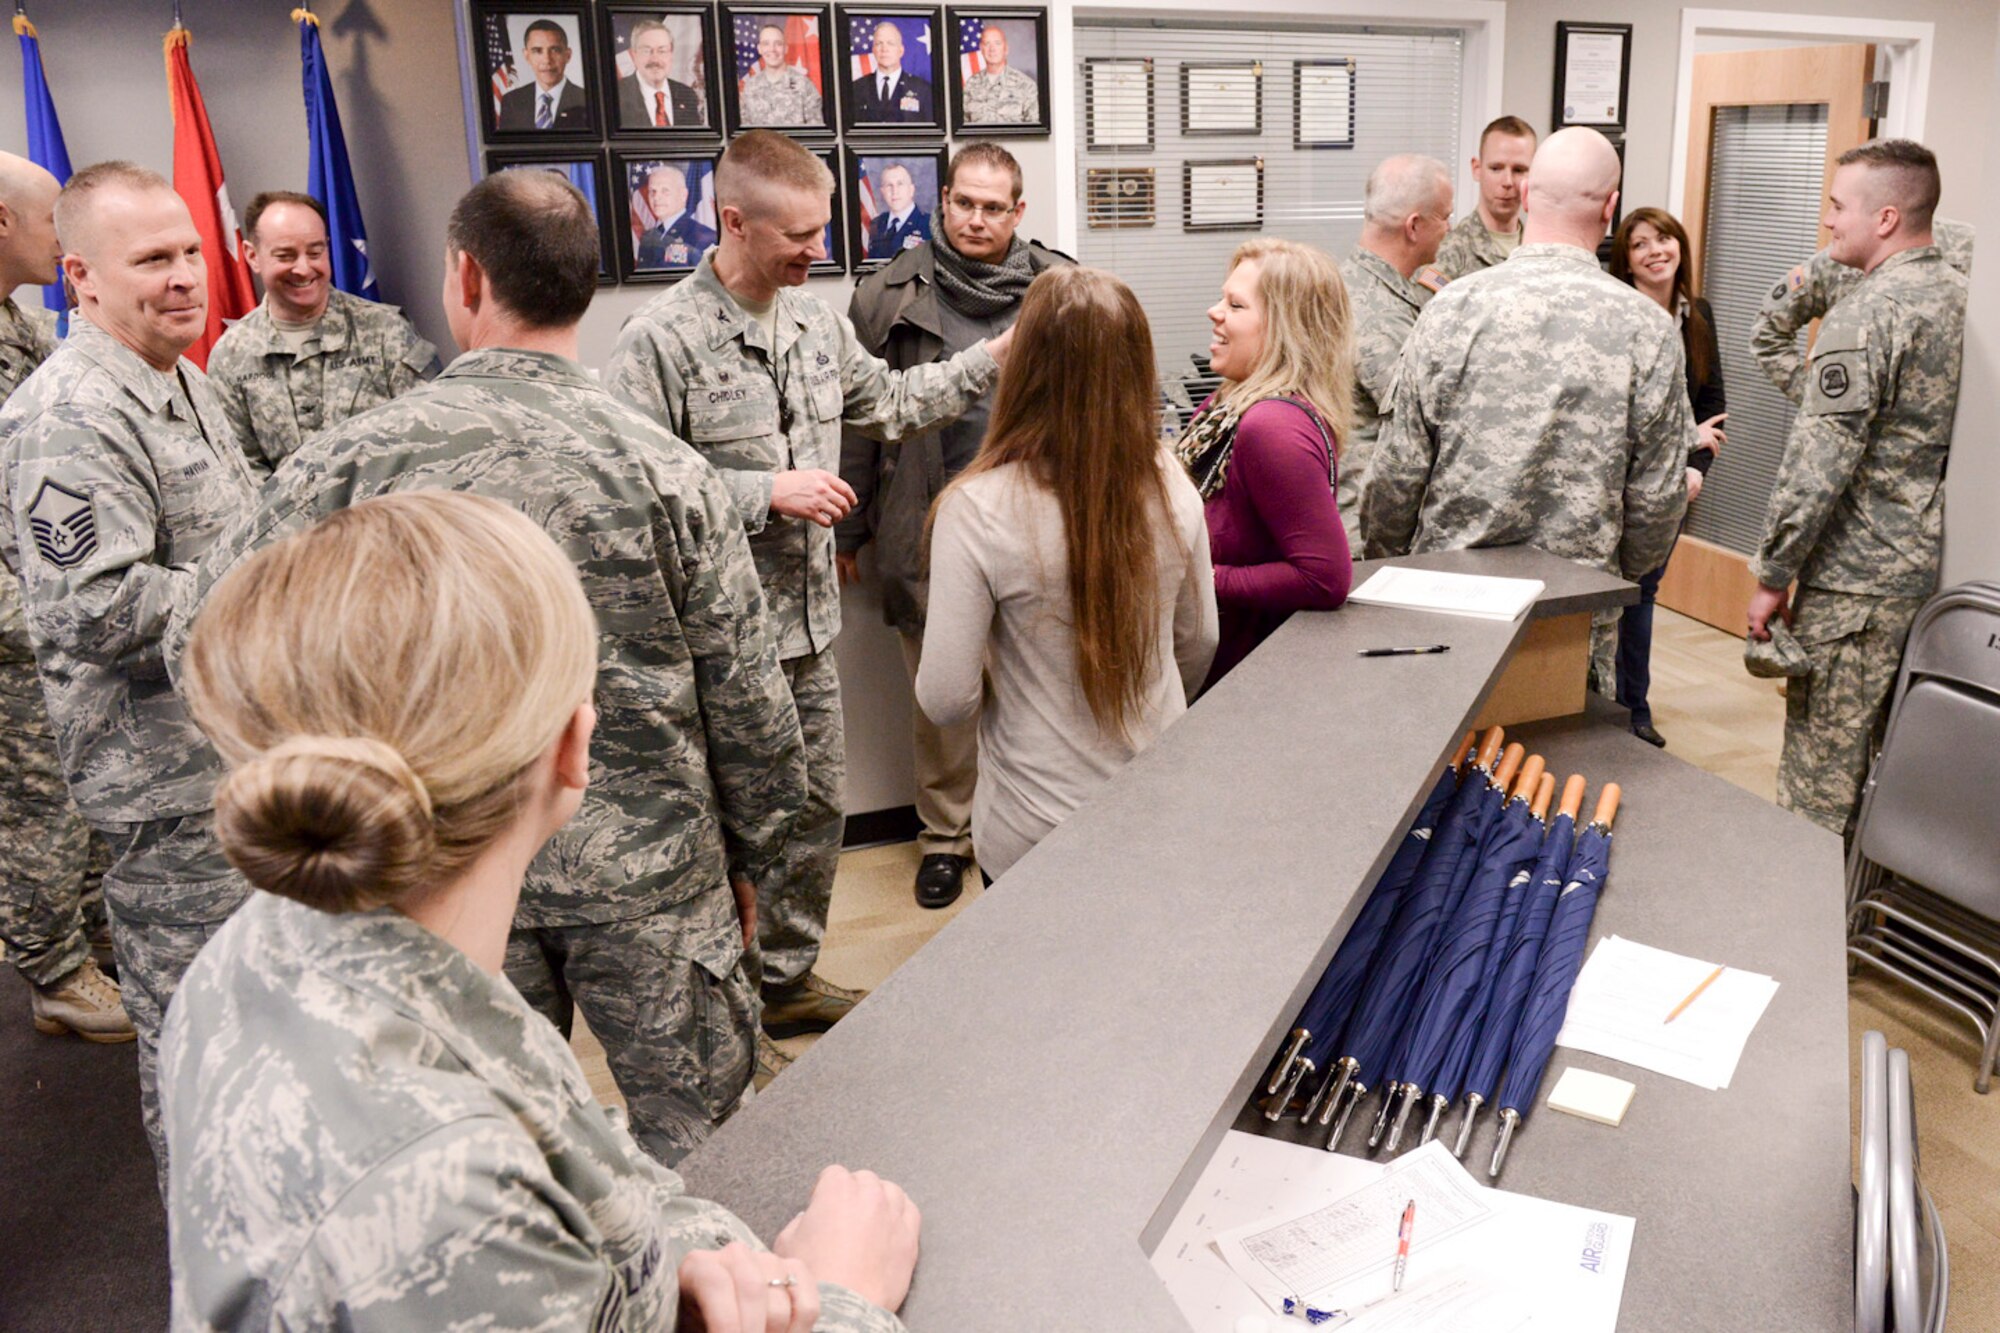 Members of the Iowa Air and Army National Guard celebrate the opening of the 132d Wing, Des Moines, Iowa off-site Recruiting Operation Center during a ribbon cutting ceremony held at the new Recruiting Operation Center in West Des Moines, Iowa on Tuesday, March 24, 2015.  (U.S. Air National Guard photo by Staff Sgt. Linda K. Burger/Released)